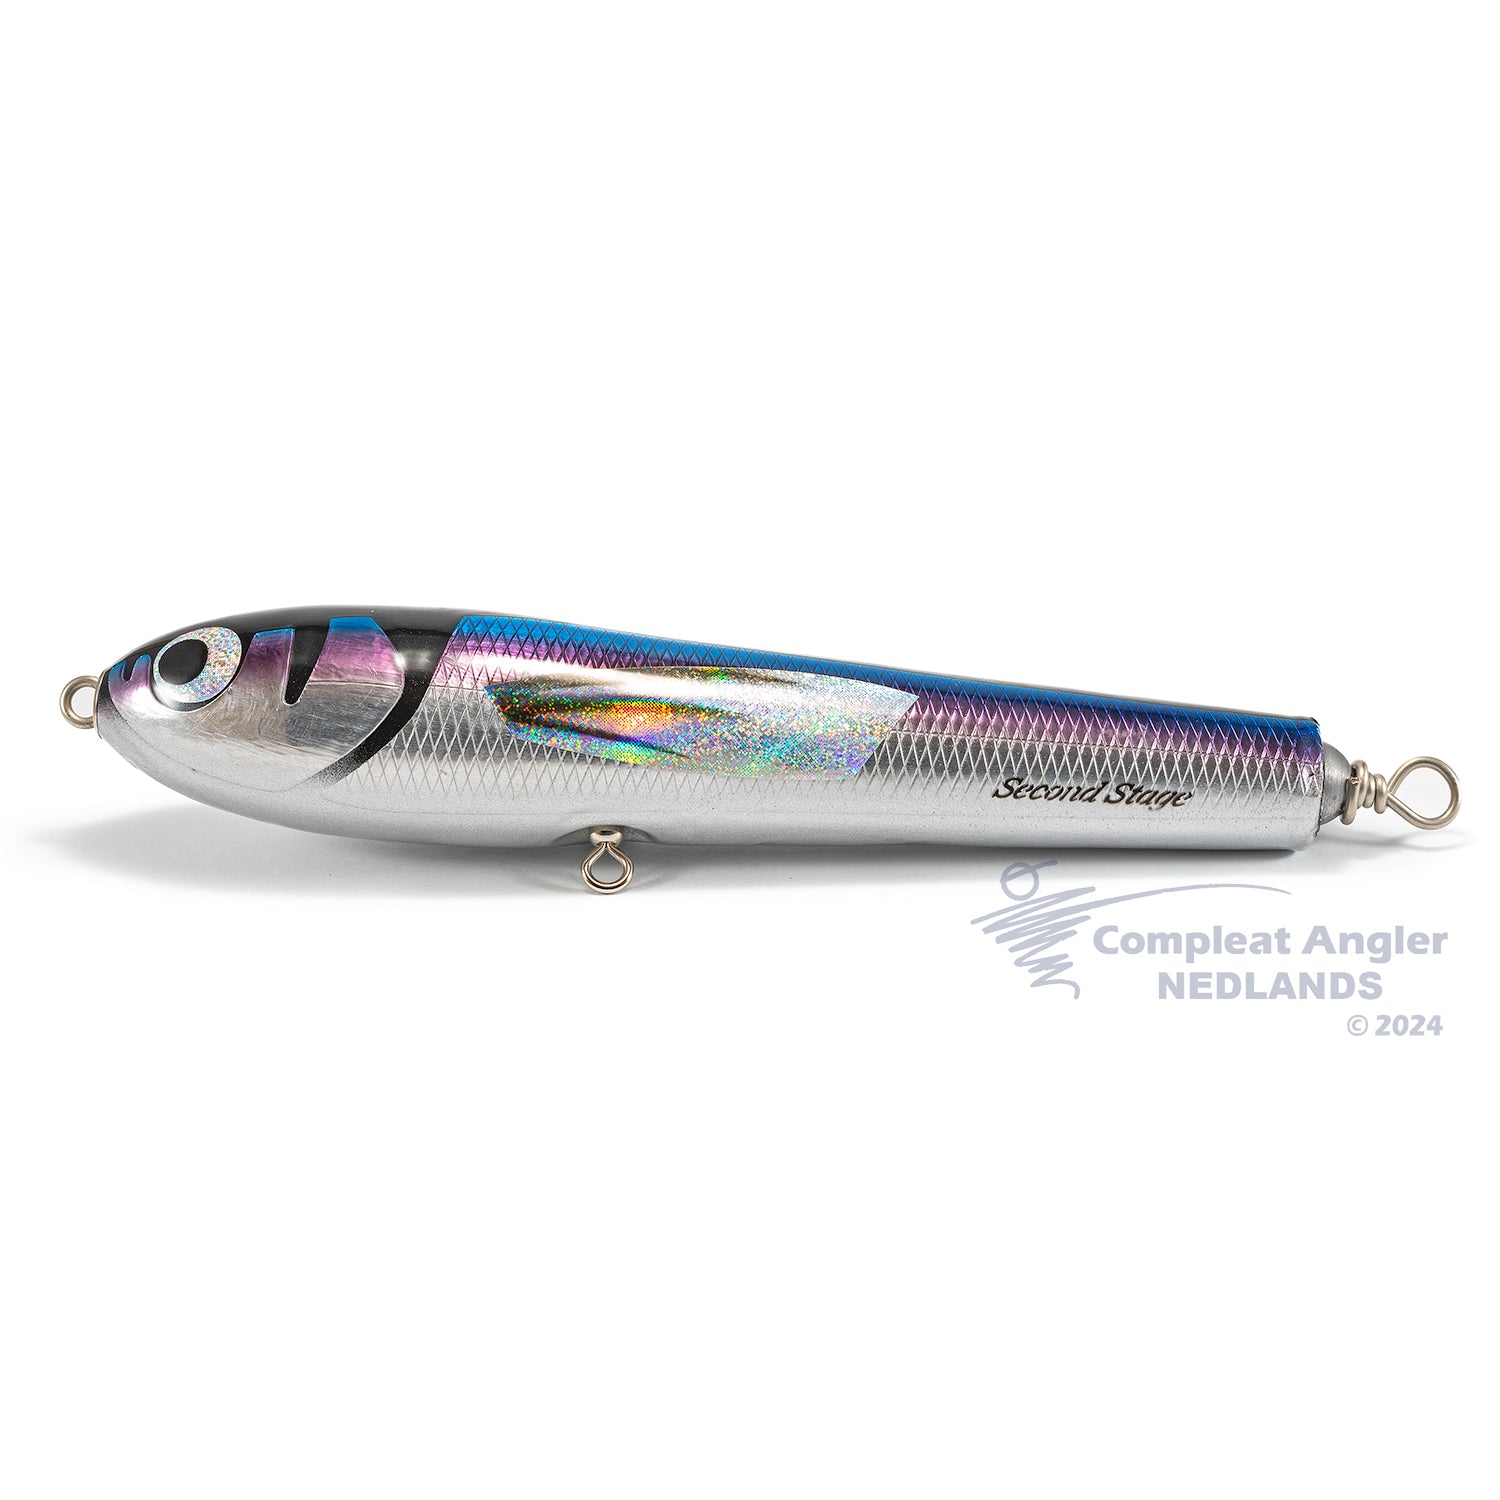 Second Stage Blue Dragon 180mm Flying Fish